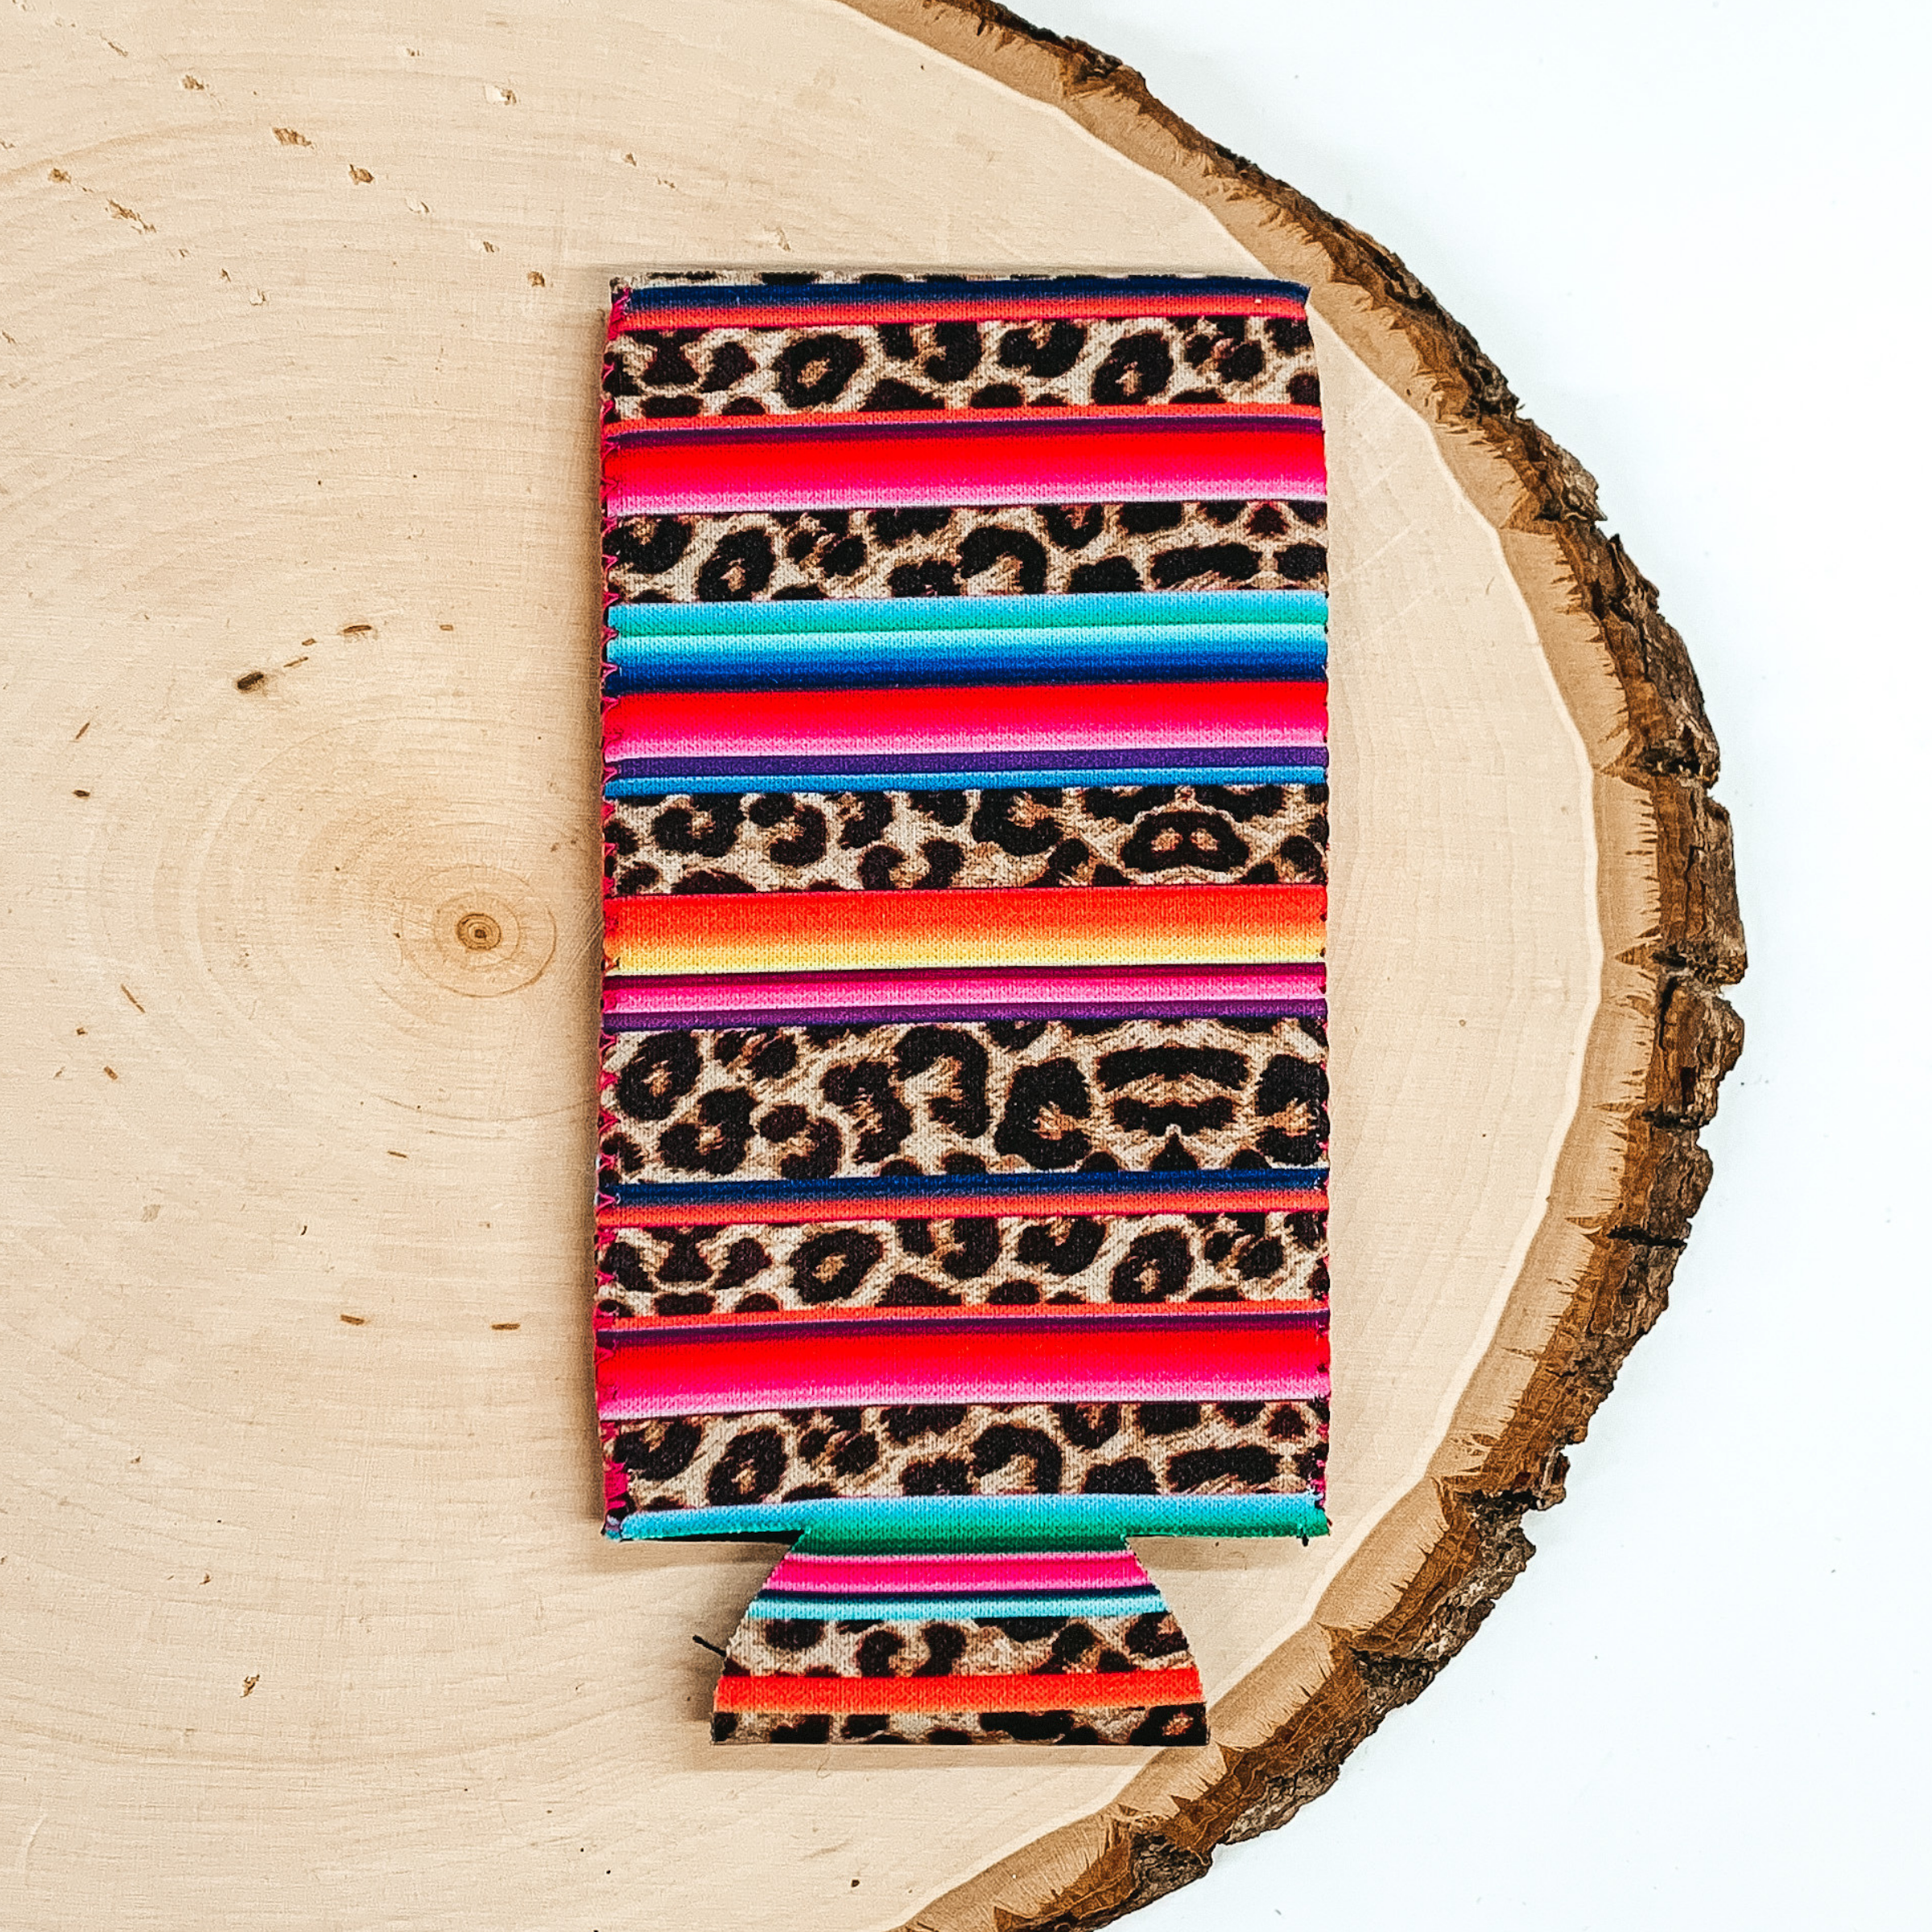 Striped serape and striped leopard print slim can koozie pictured laying on a piece of wood on a white background.